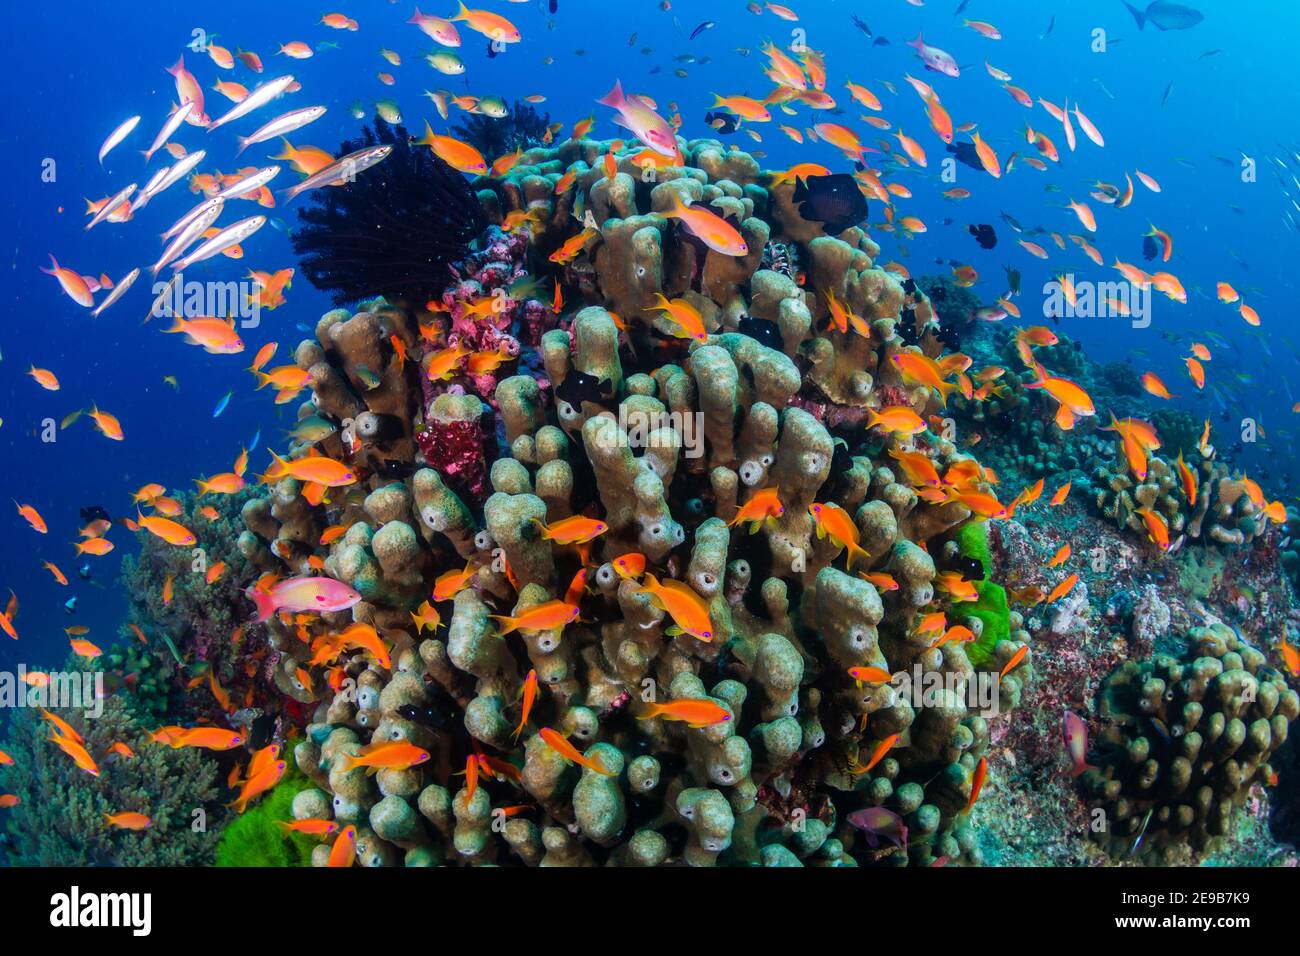 Schools of colorful tropical fish swimming around corals on a